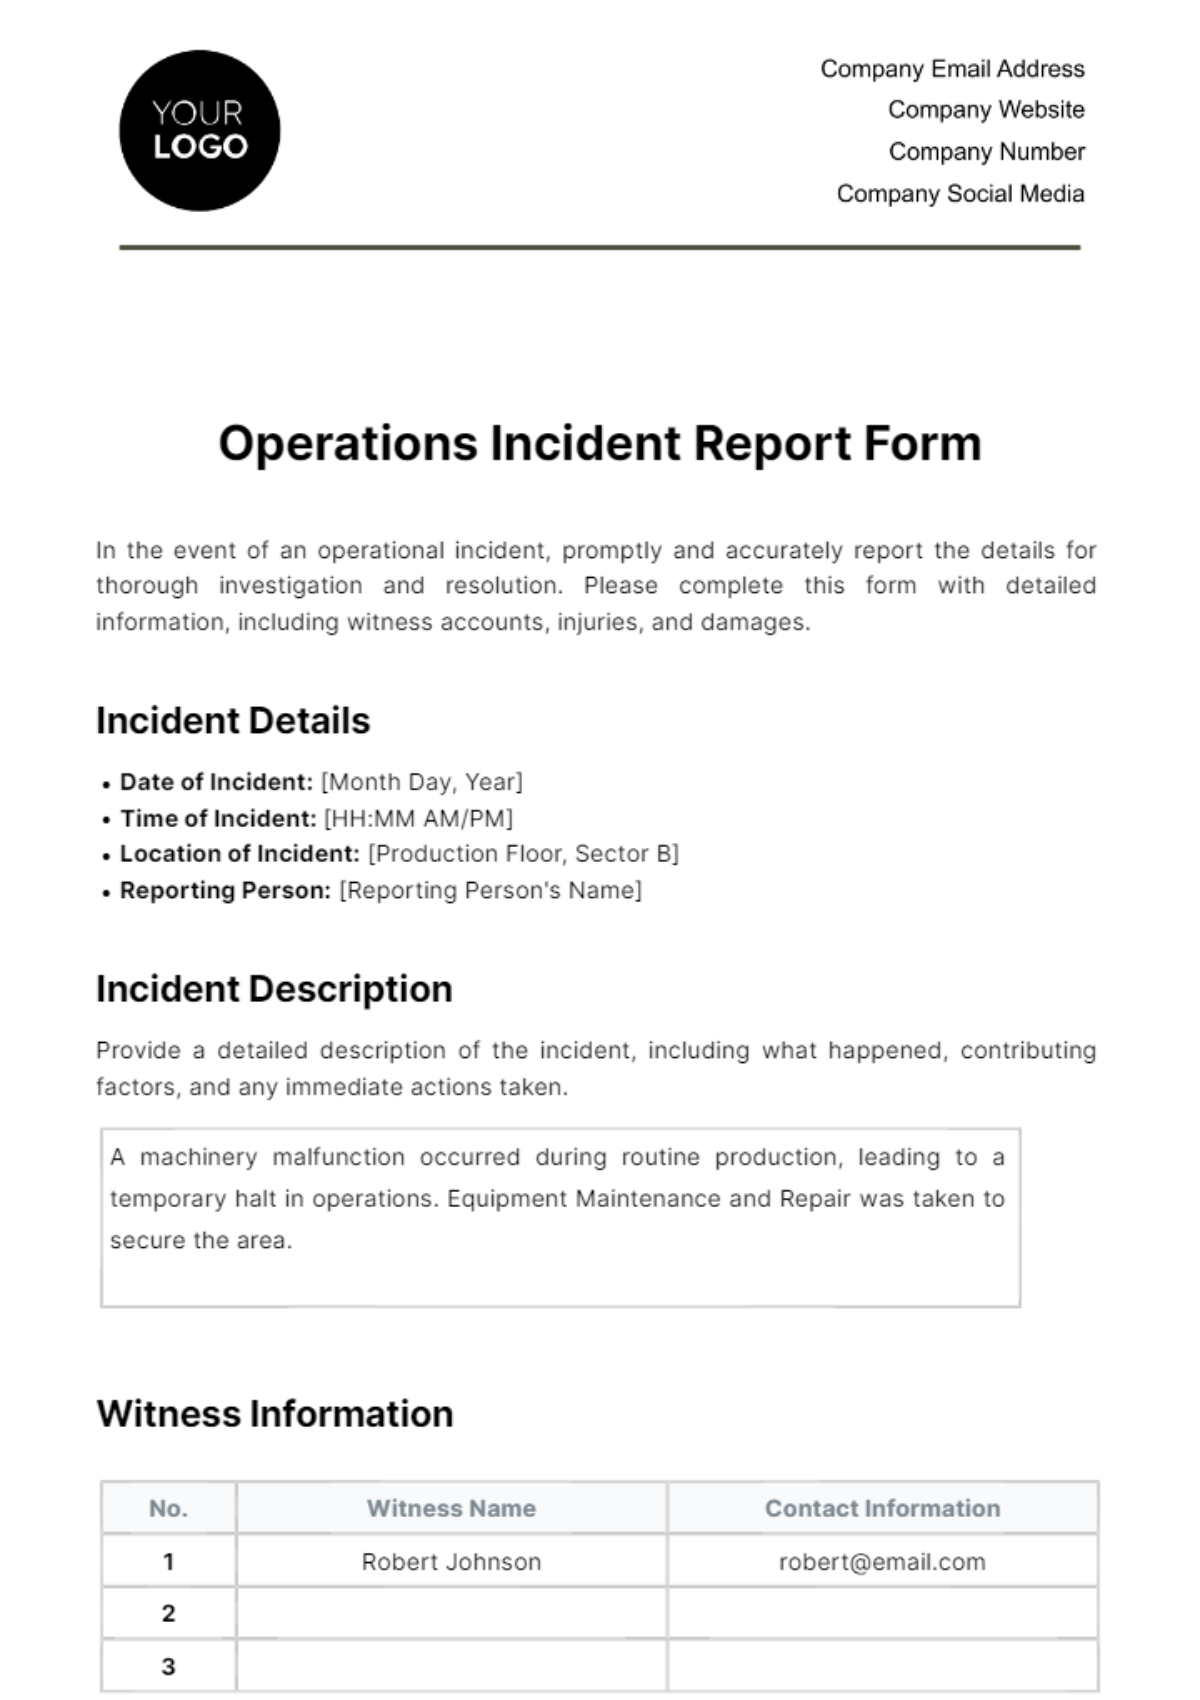 Free Operations Incident Report Form Template